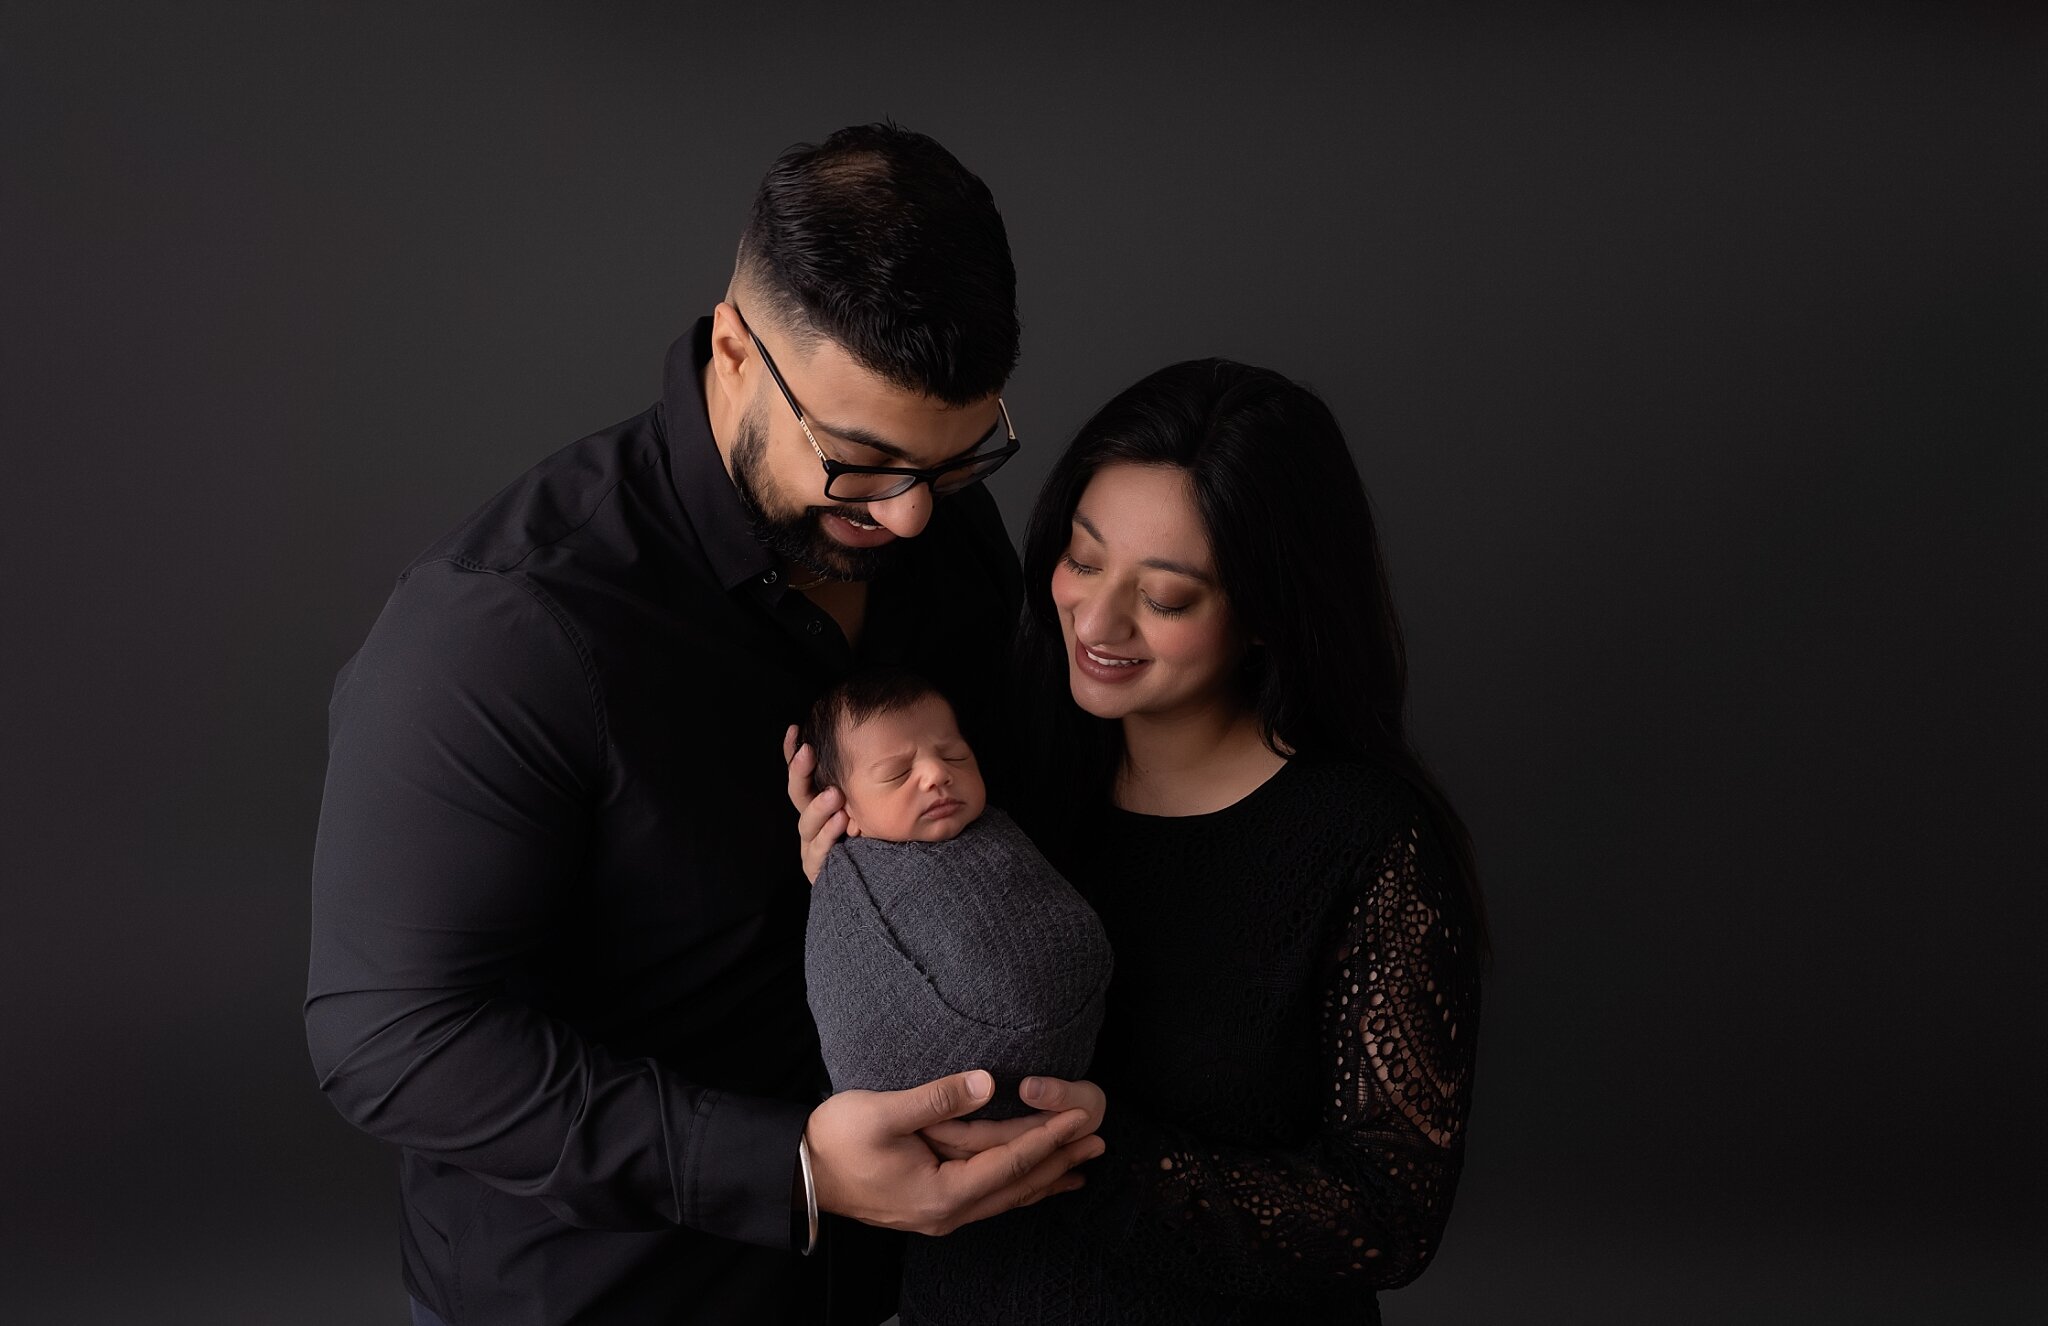 April is almost fully booked! March has 1 last minute open newborn spot left! 
Book a newborn session and receive a FREE Maternity Mini session or Milestone Session! 

Link to book a session or see pricing: https://www.connerjamesphotography.com/book